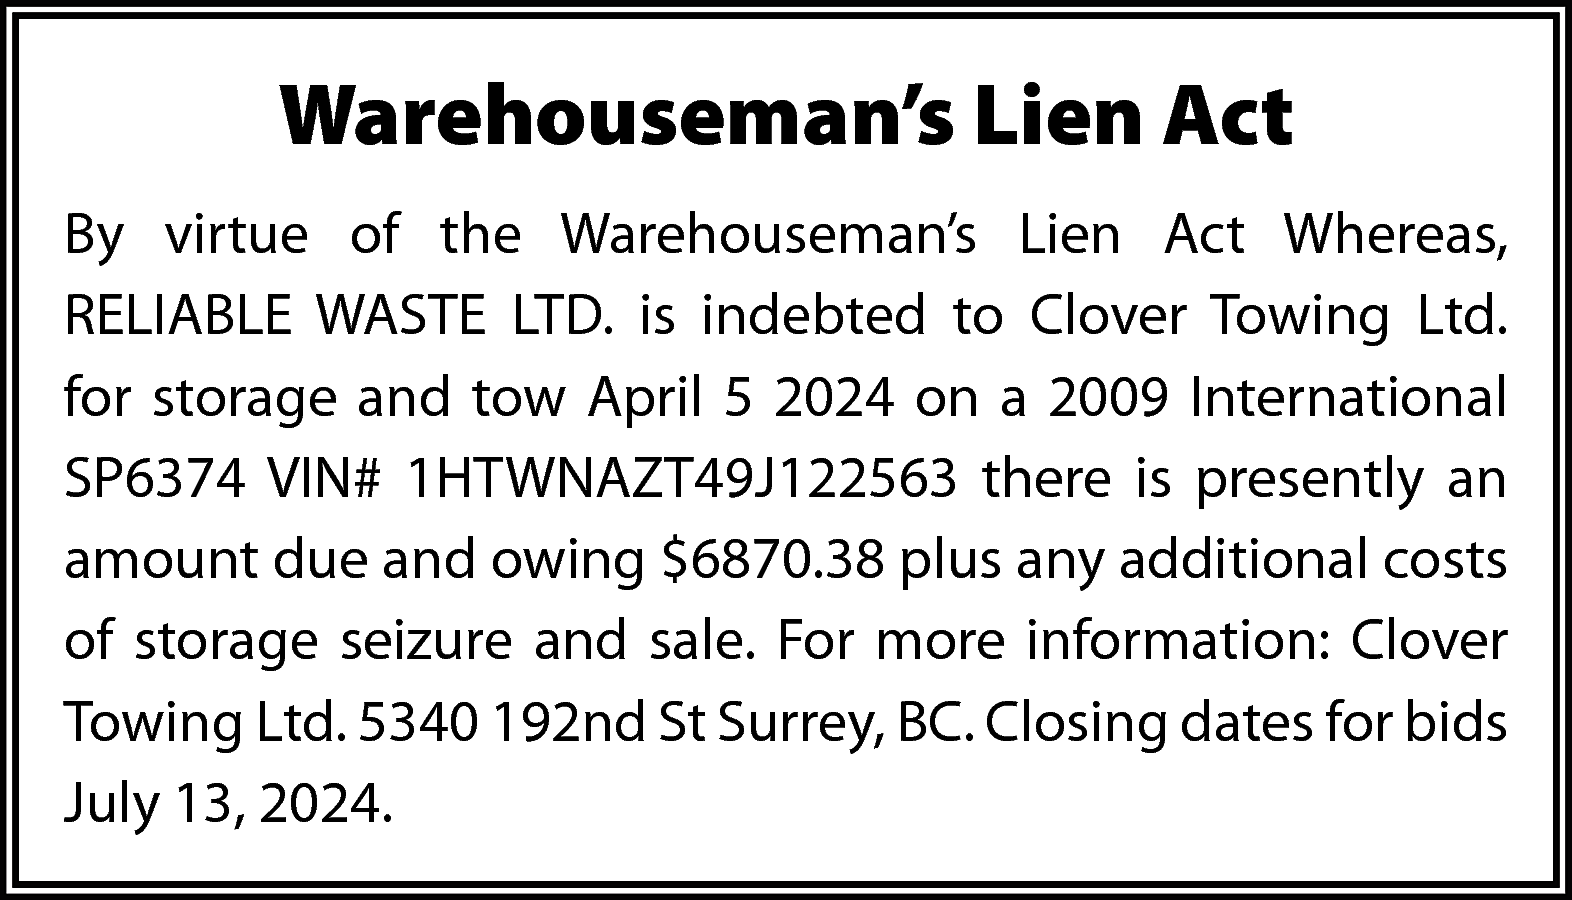 Warehouseman’s Lien Act <br>By virtue  Warehouseman’s Lien Act  By virtue of the Warehouseman’s Lien Act Whereas,  RELIABLE WASTE LTD. is indebted to Clover Towing Ltd.  for storage and tow April 5 2024 on a 2009 International  SP6374 VIN# 1HTWNAZT49J122563 there is presently an  amount due and owing $6870.38 plus any additional costs  of storage seizure and sale. For more information: Clover  Towing Ltd. 5340 192nd St Surrey, BC. Closing dates for bids  July 13, 2024.    